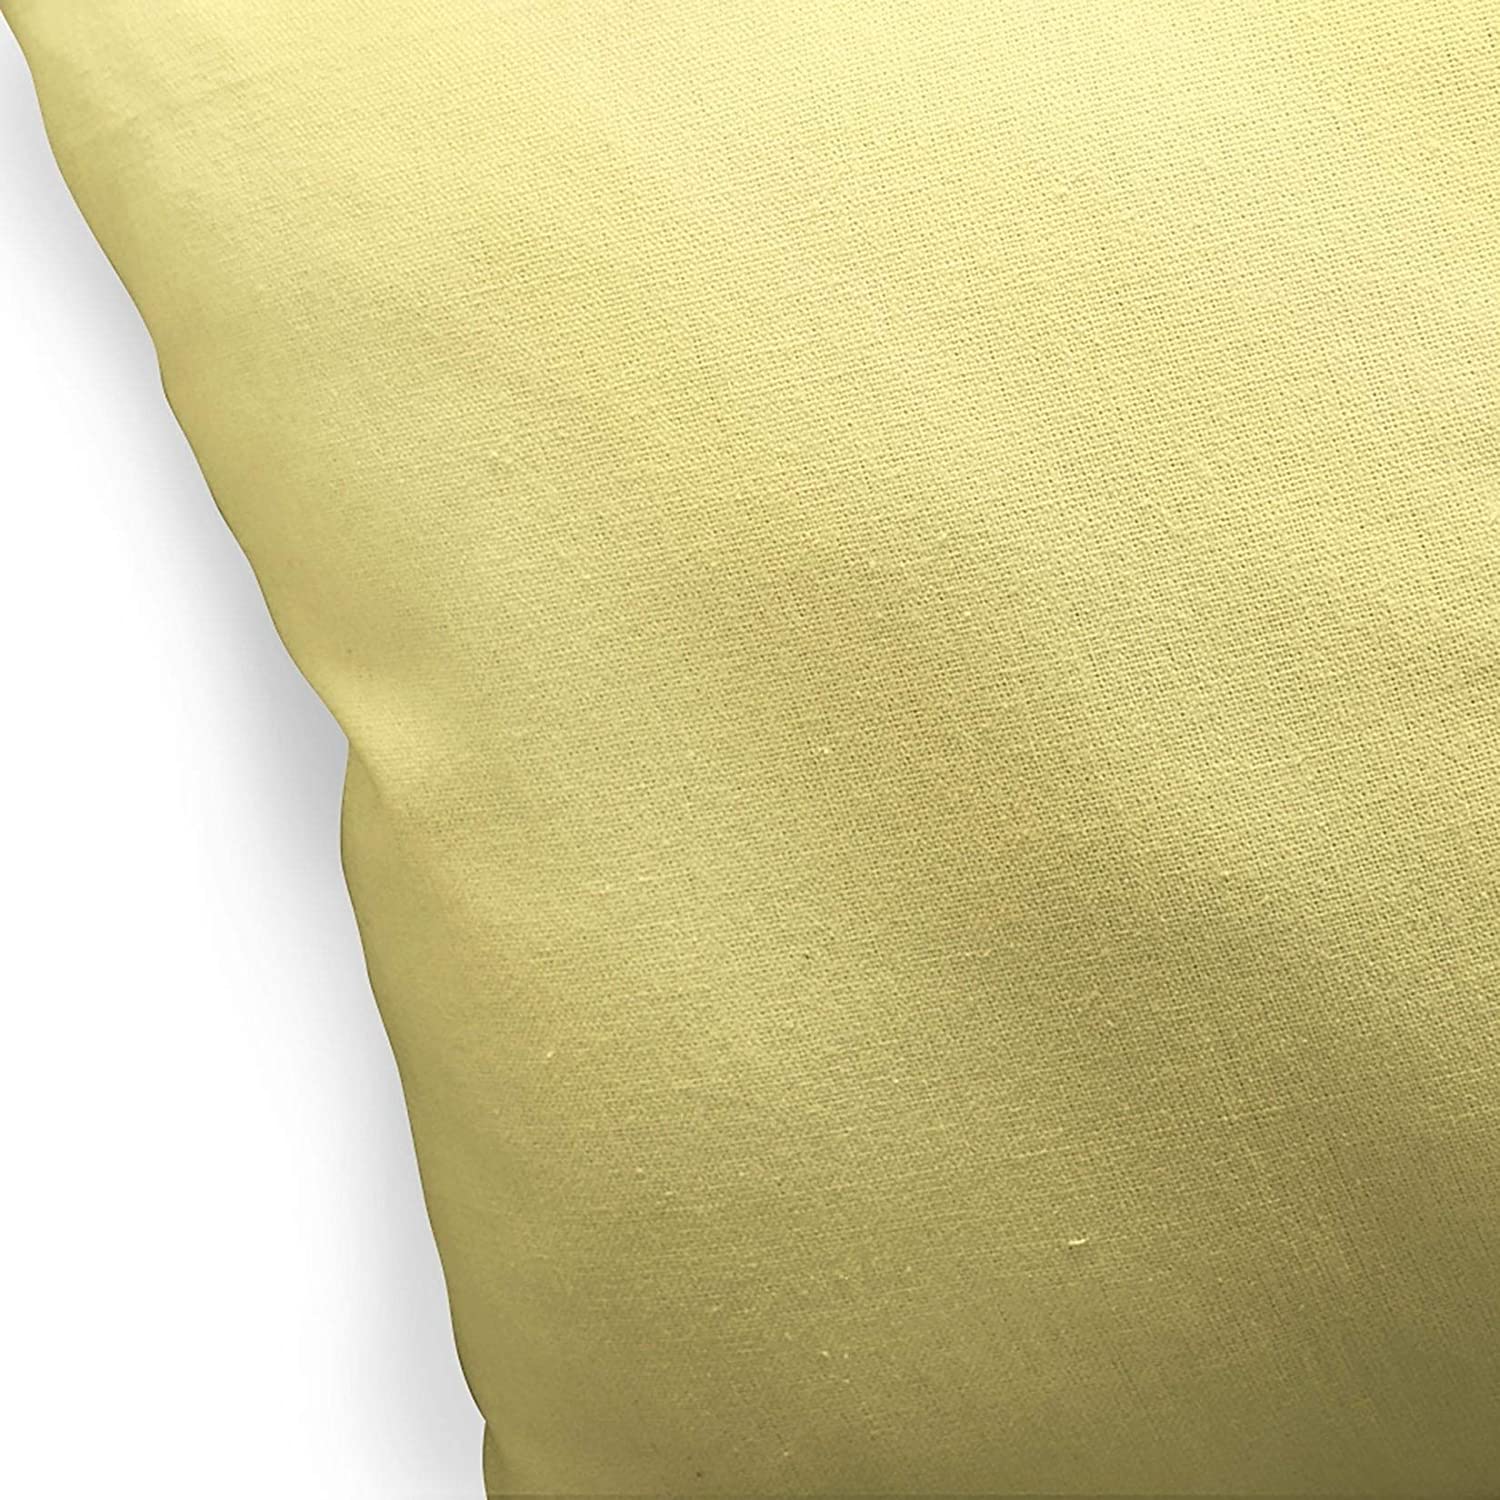 Butter Dream Indoor|Outdoor Pillow by 18x18 Yellow Modern Contemporary Polyester Removable Cover